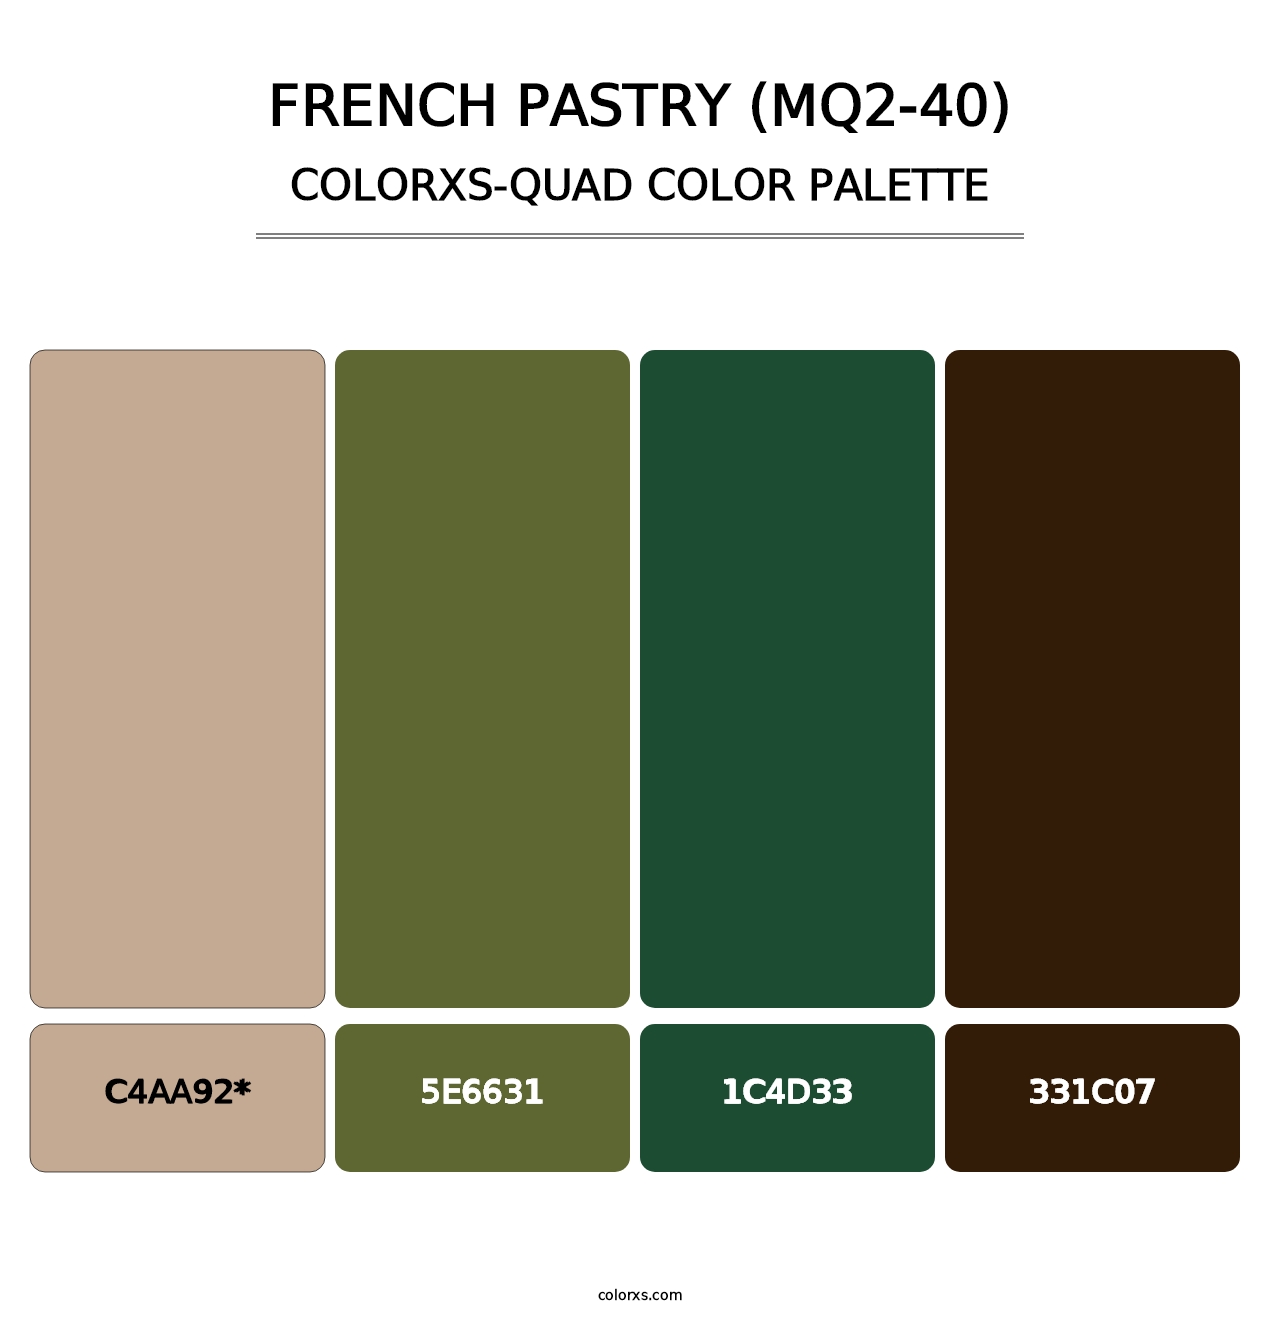 French Pastry (MQ2-40) - Colorxs Quad Palette